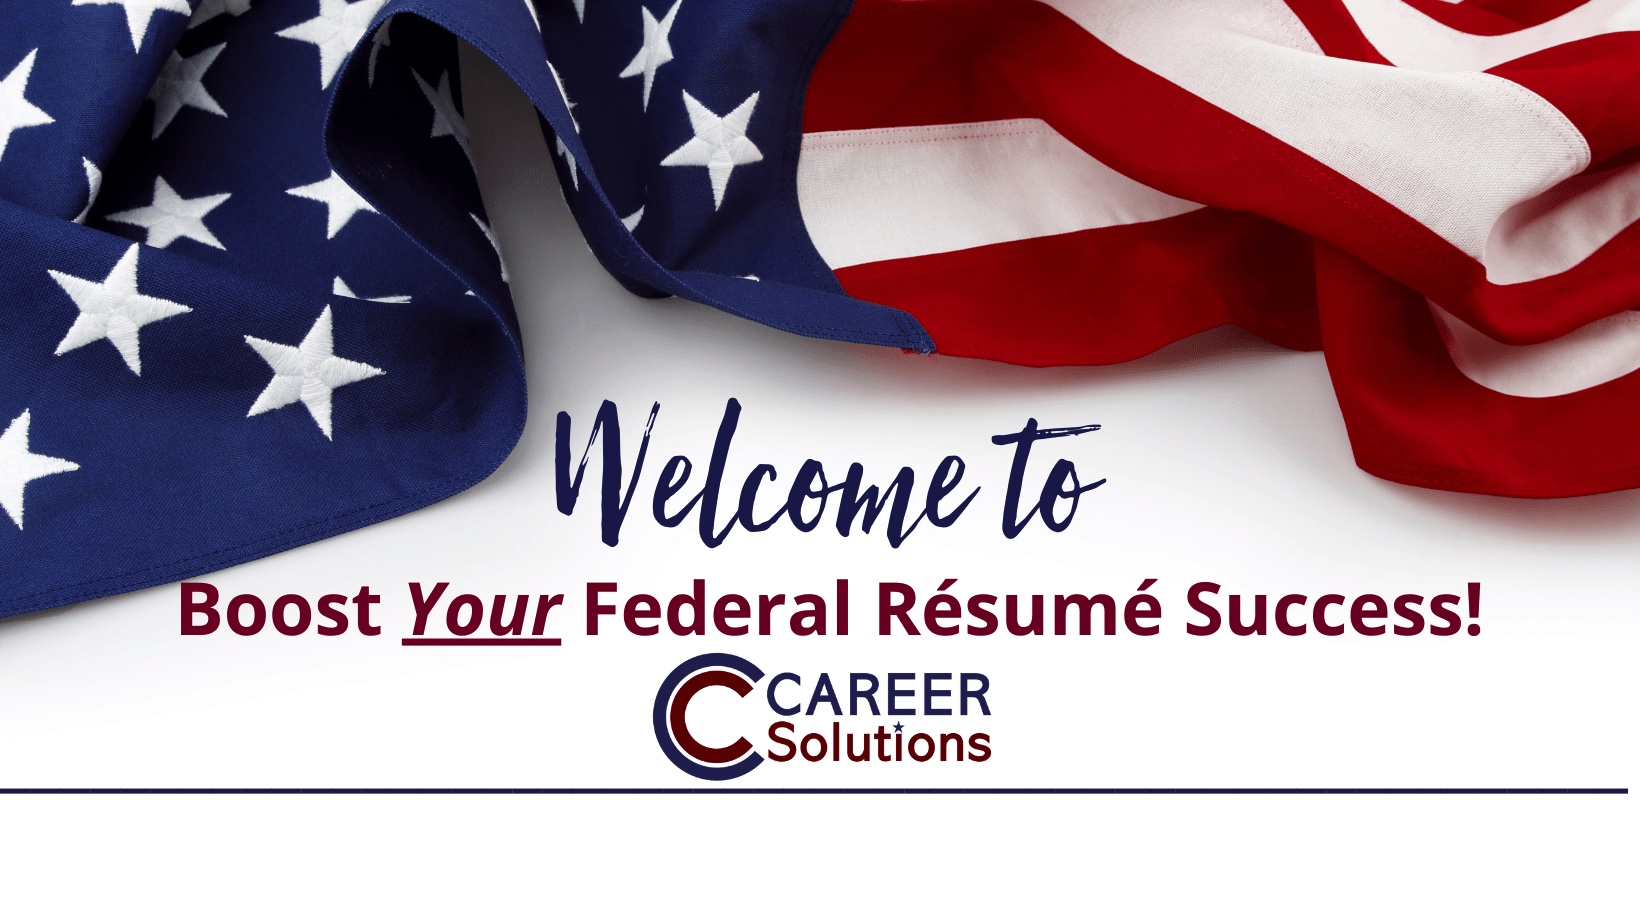 Boost Your Federal Resume